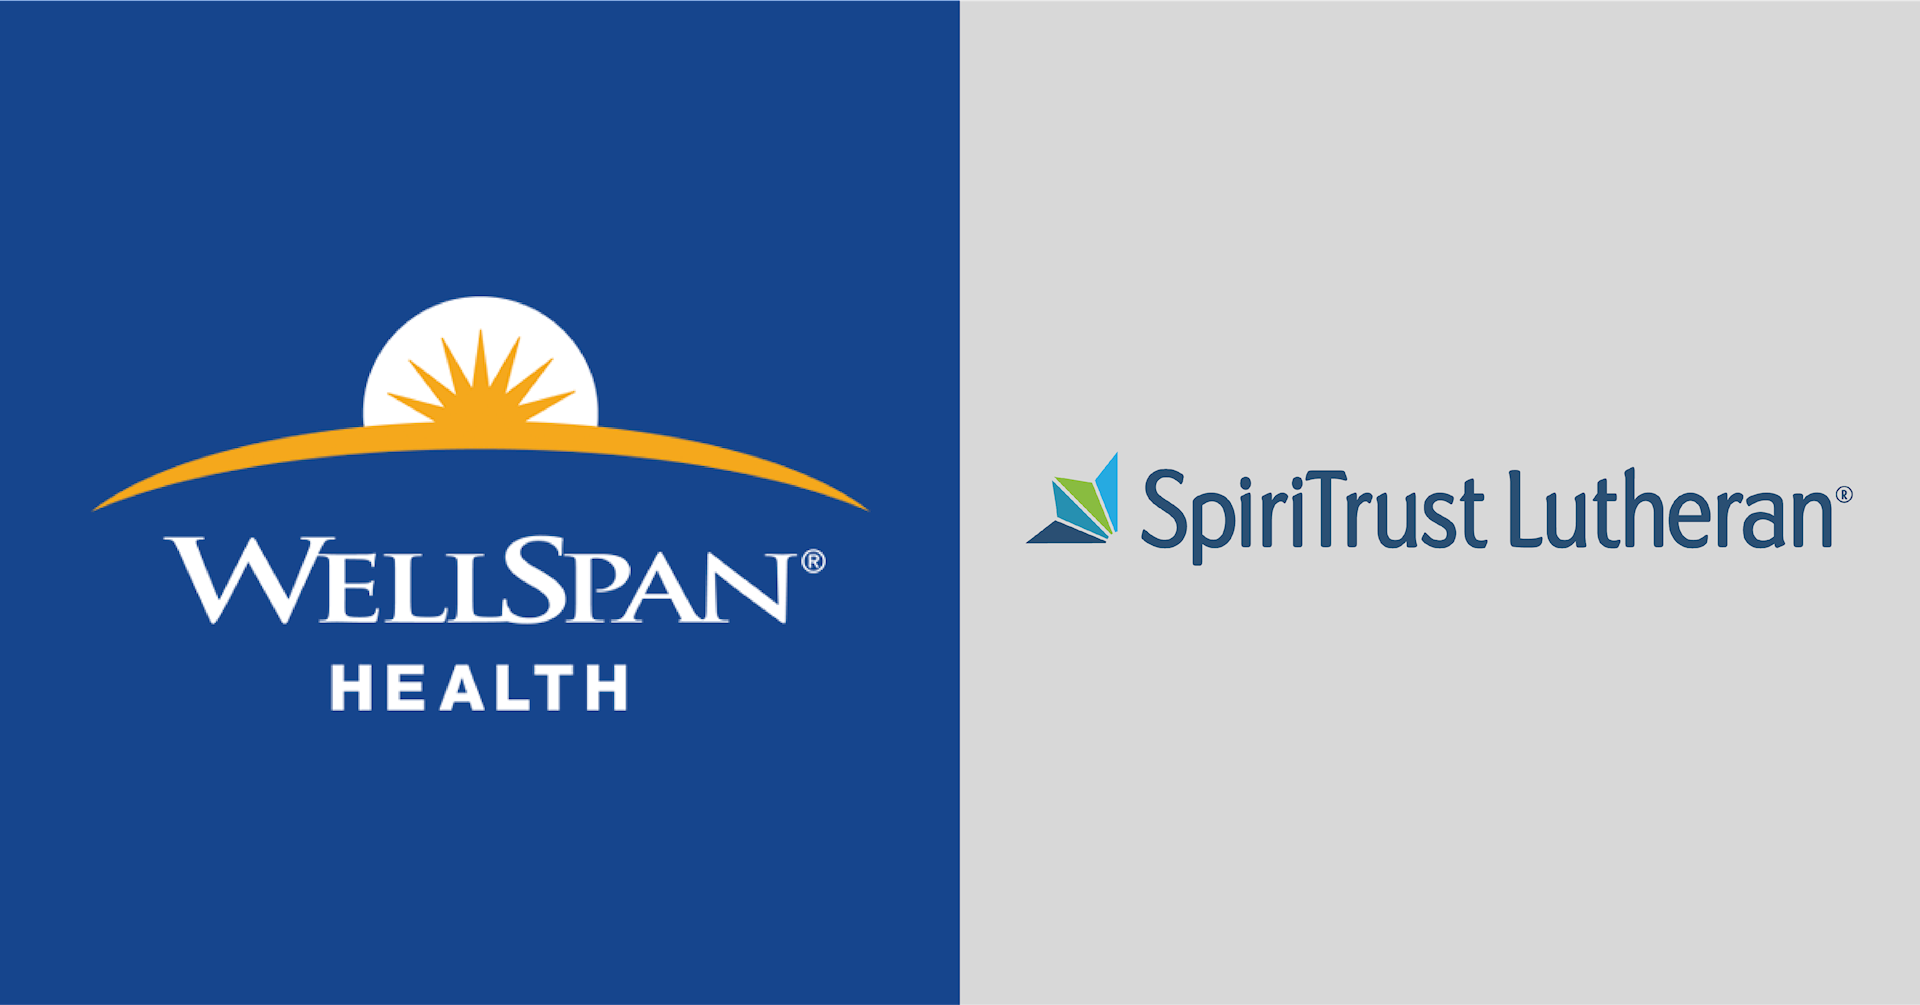 WellSpan Health, SpiriTrust Lutheran® announce strategic partnership to deliver improved access to home care, hospice & post-acute skilled care services 